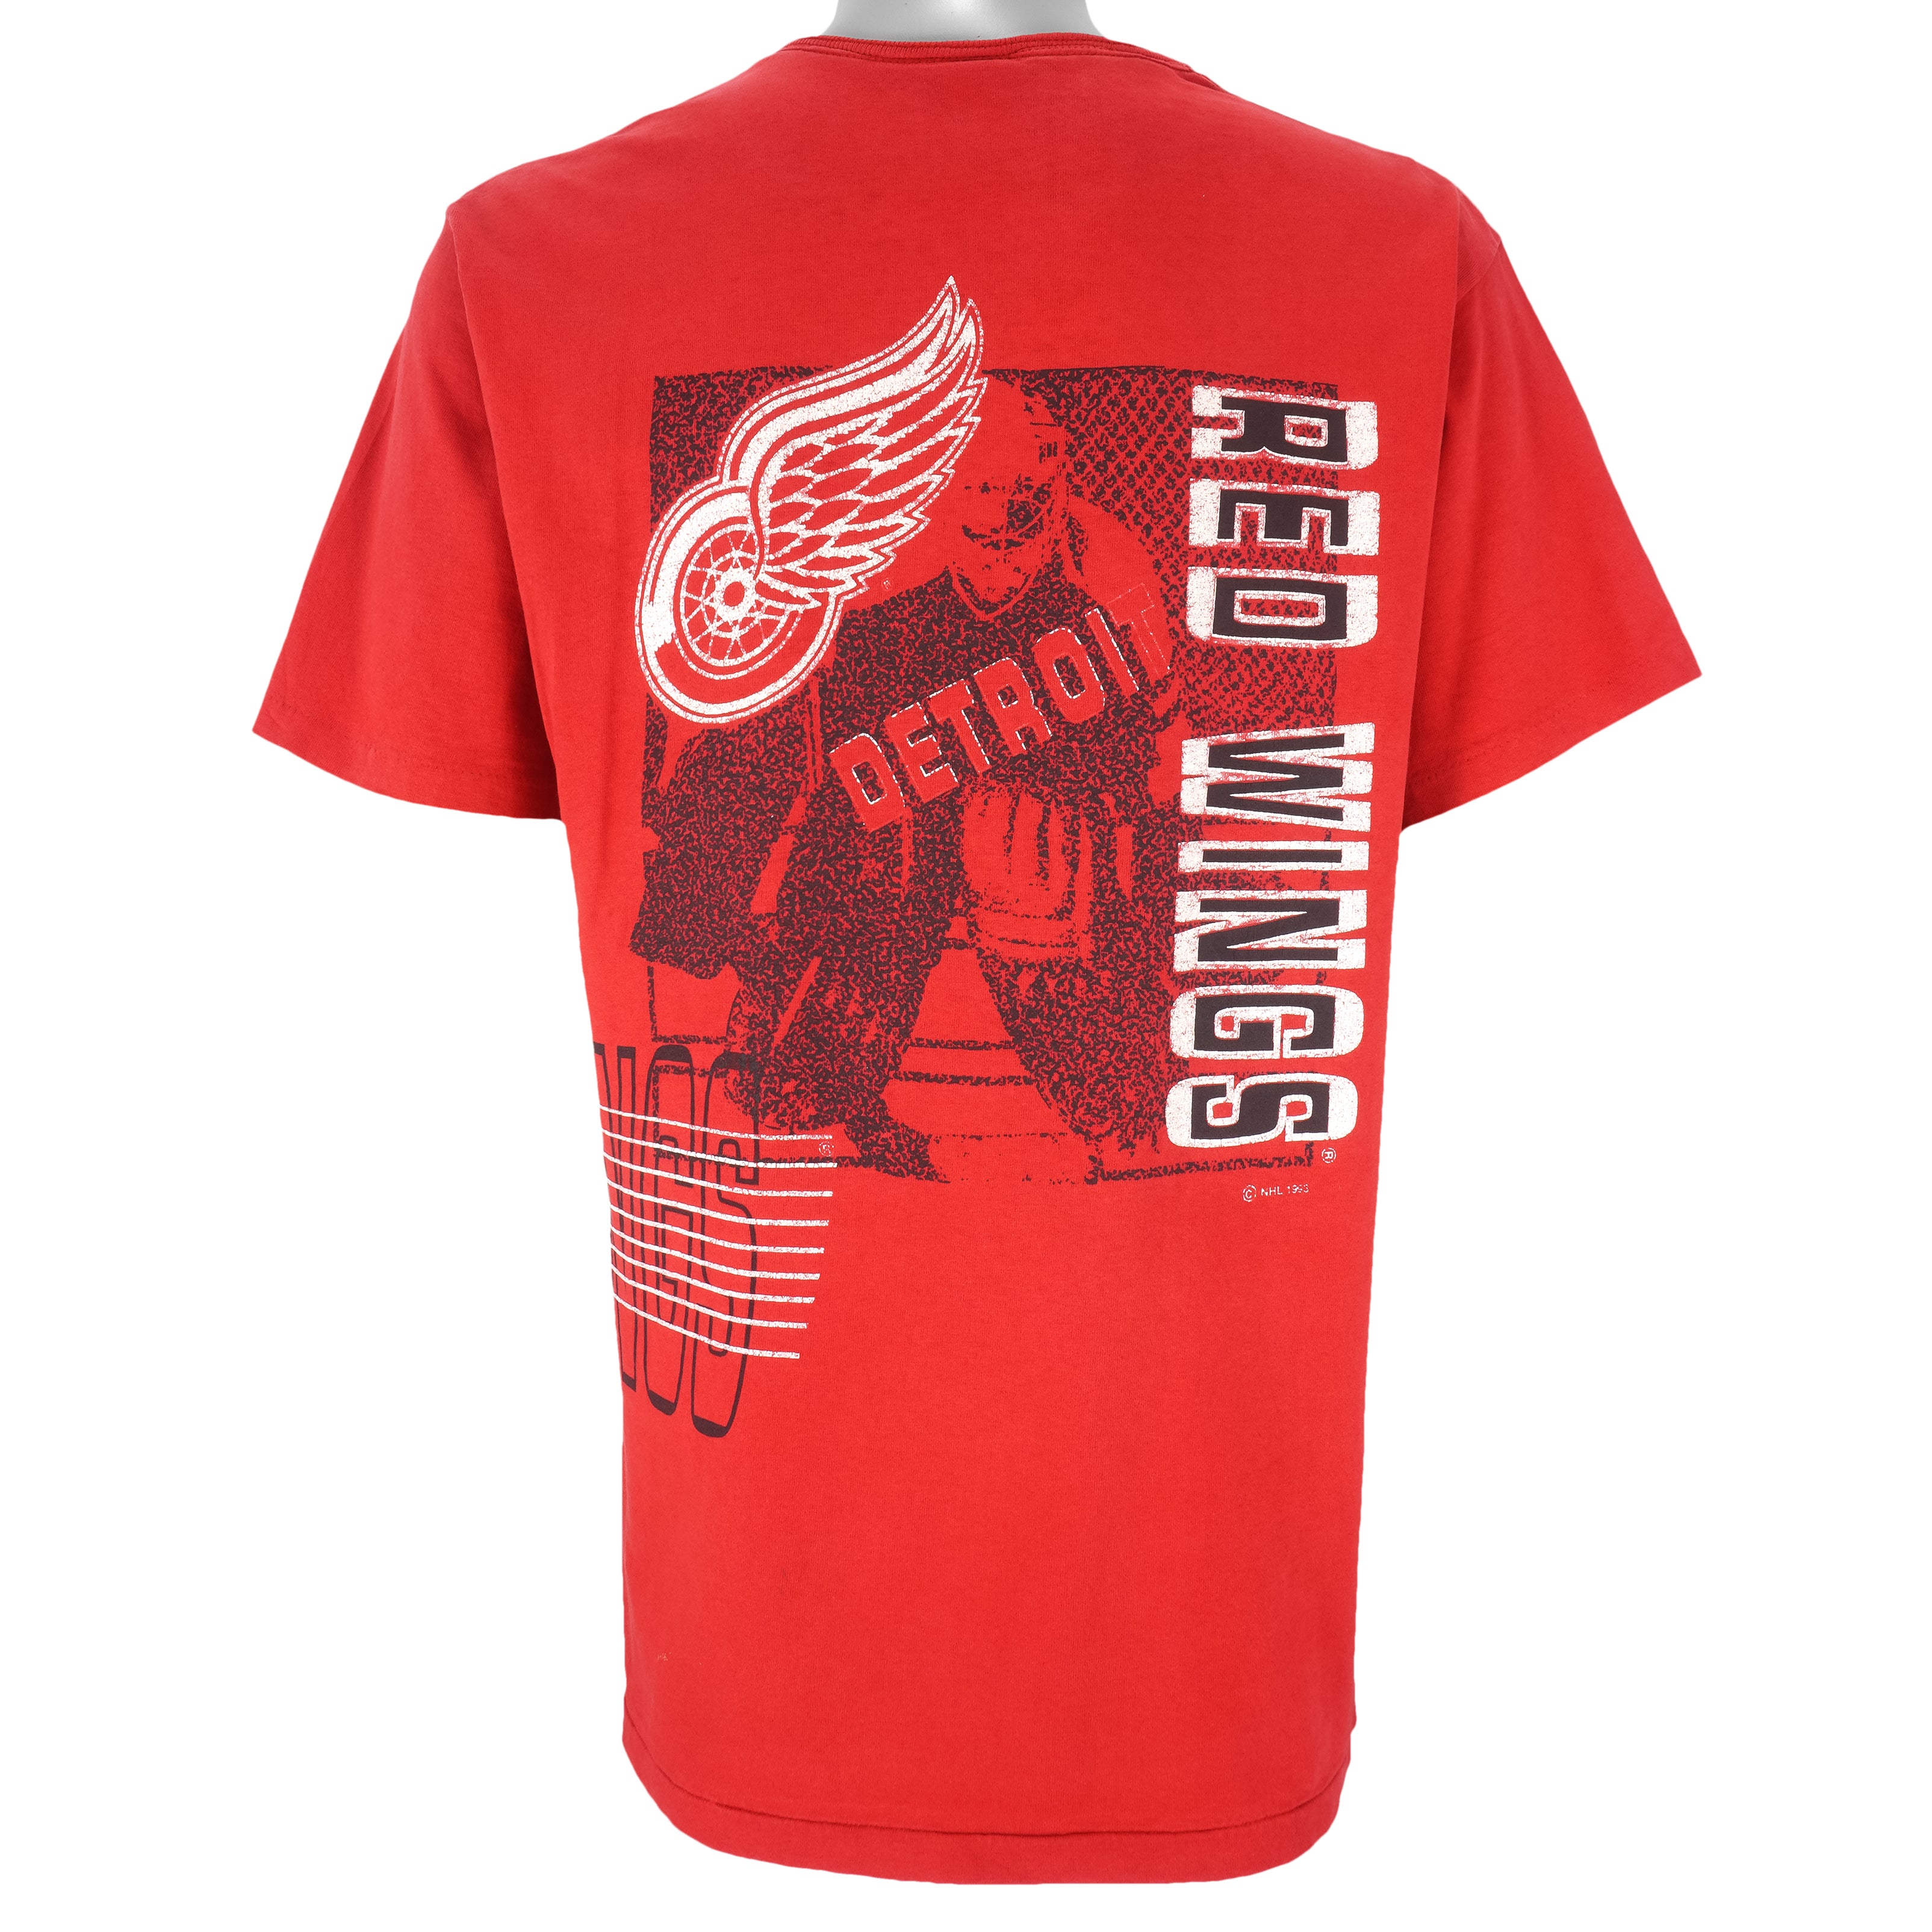 New Red Large Detroit Red Wings Shirt